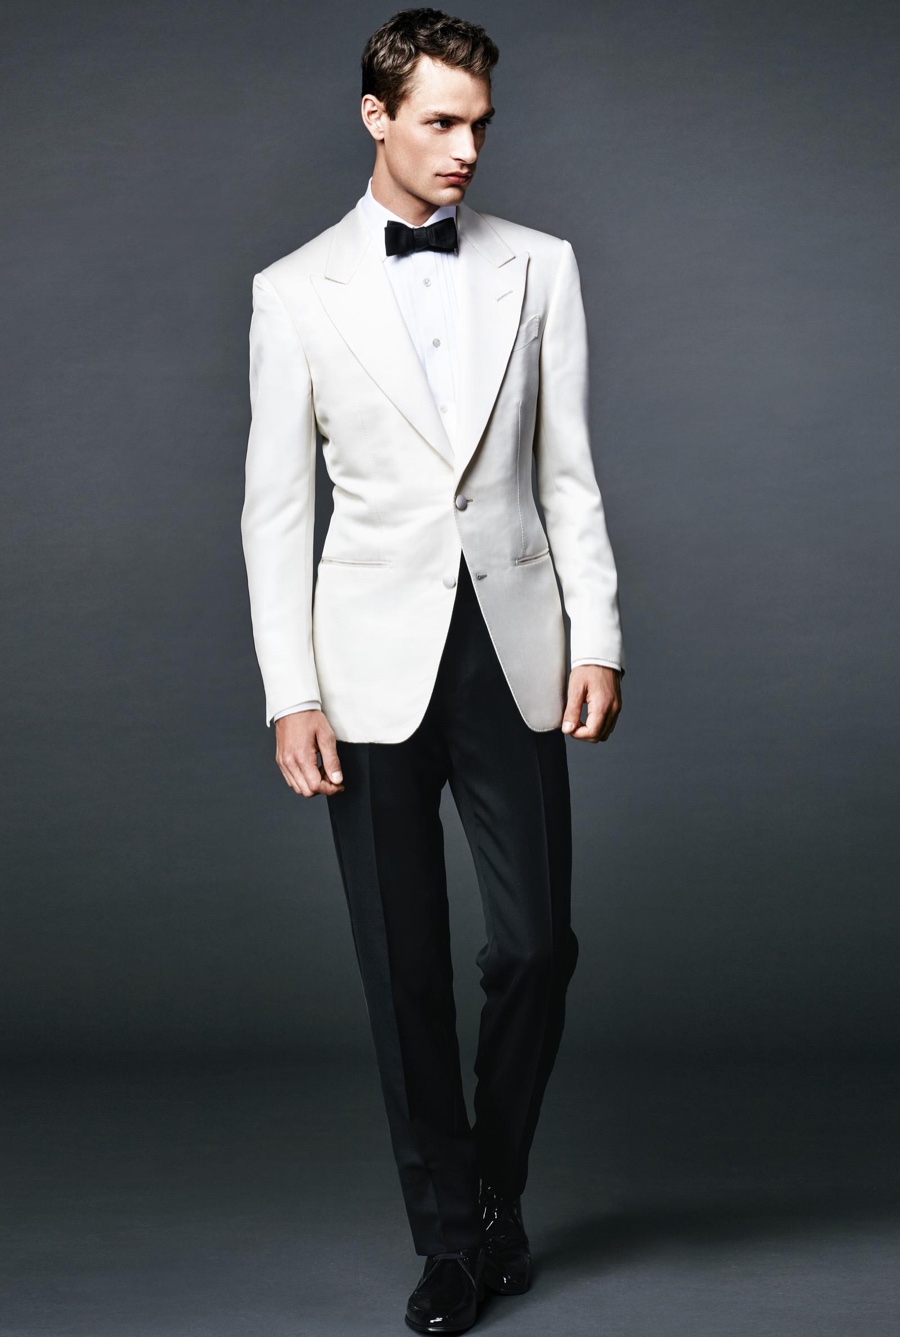 James Bond 2015 Suits Spectre Tom Ford Capsule Collection 001